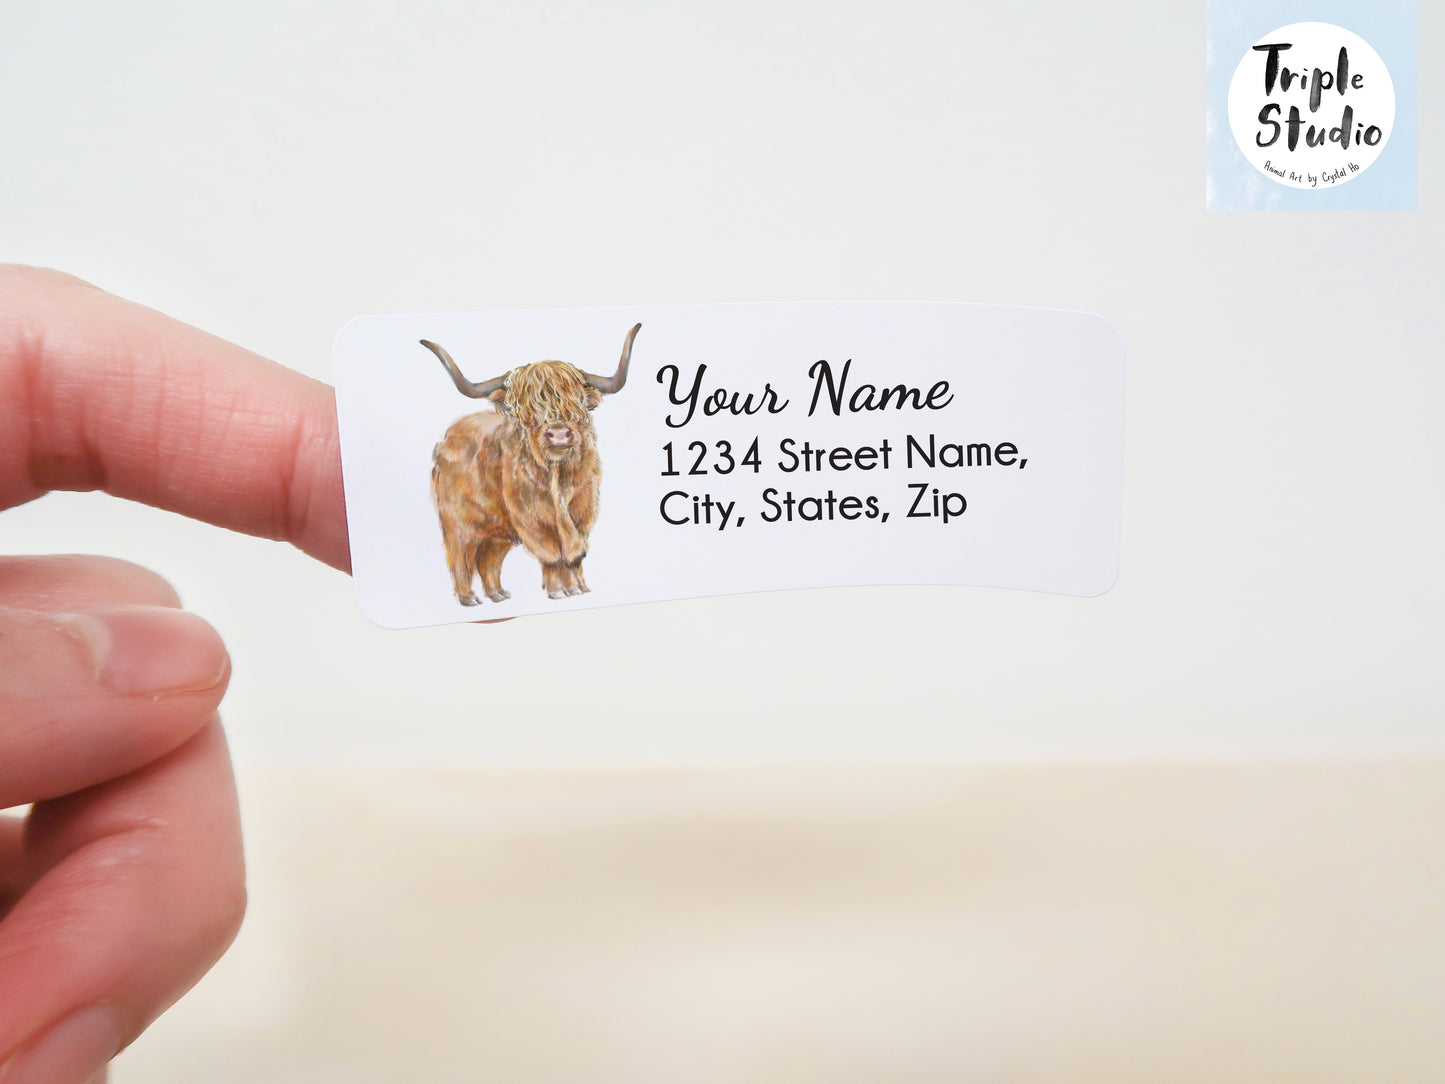 Highland Cow Personalized Address Label